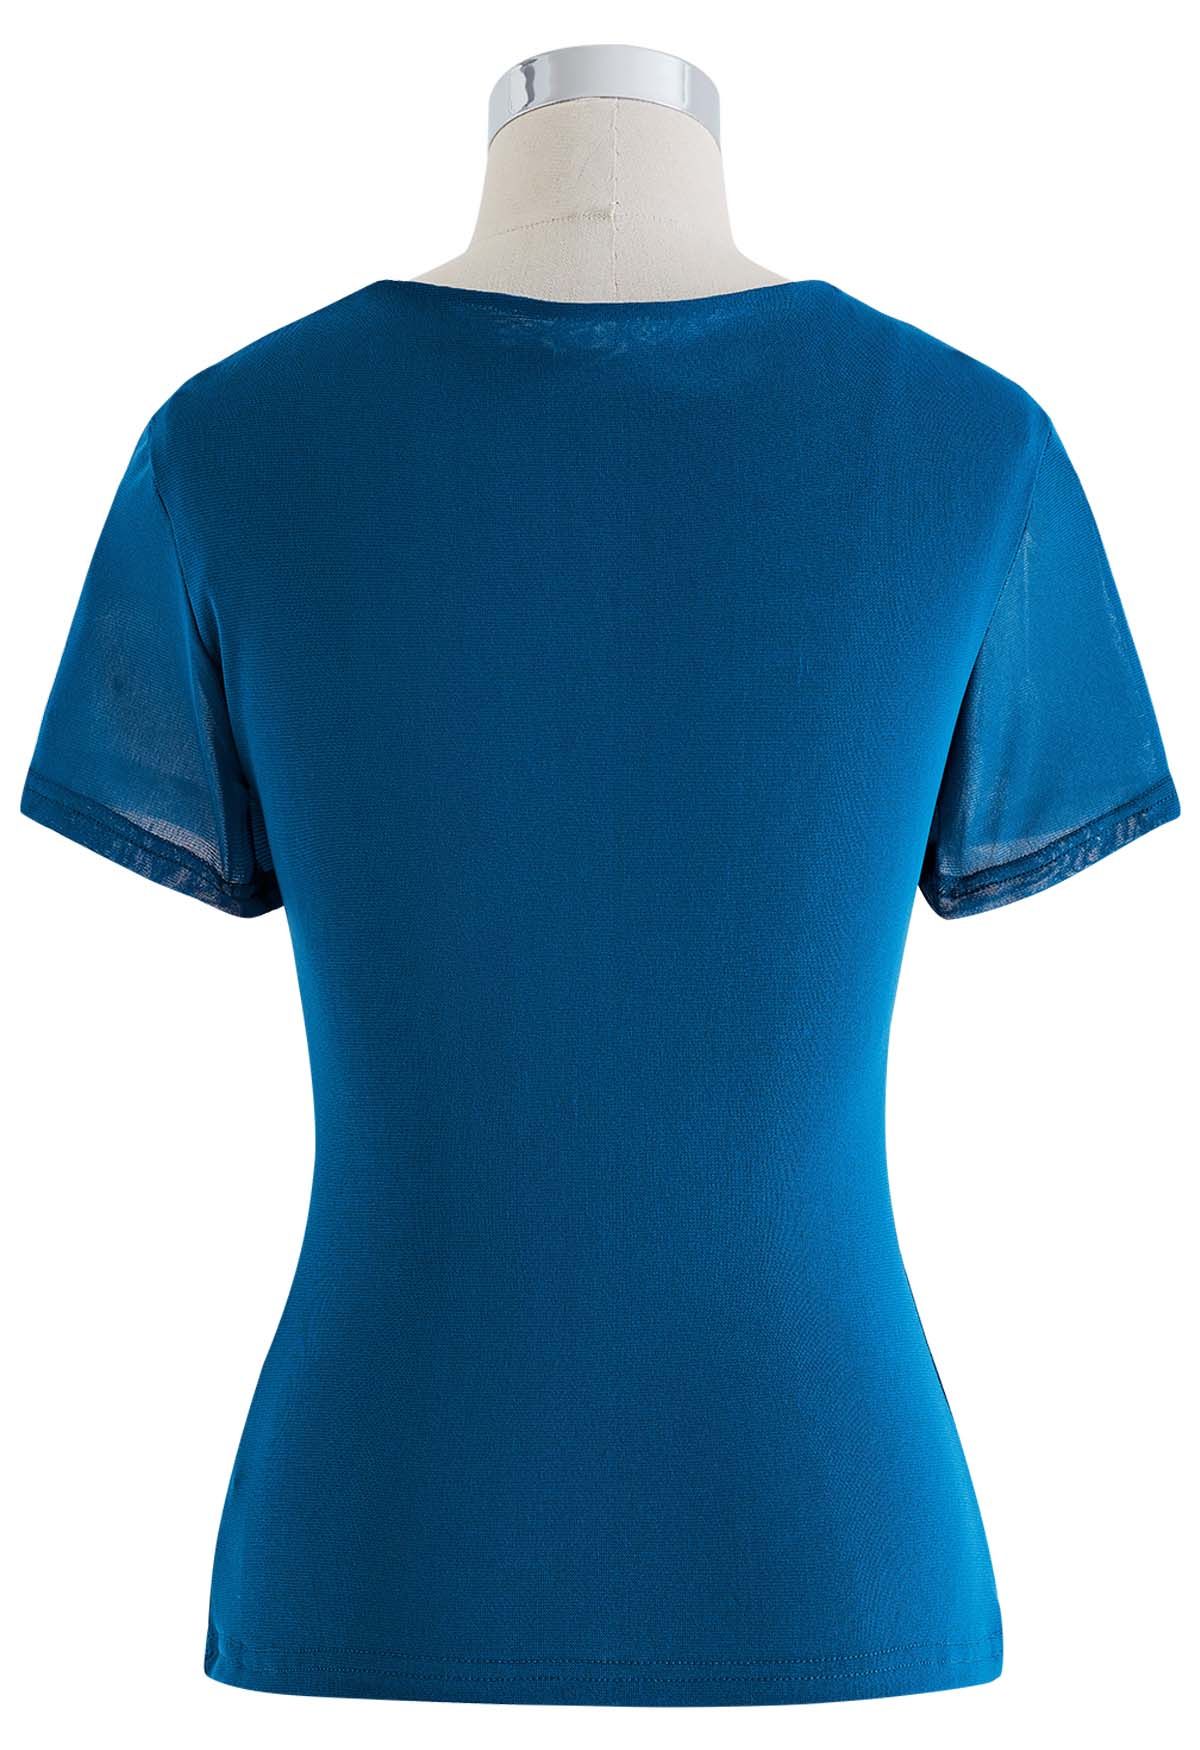 Twist Cutout Front Soft Mesh Top in Teal